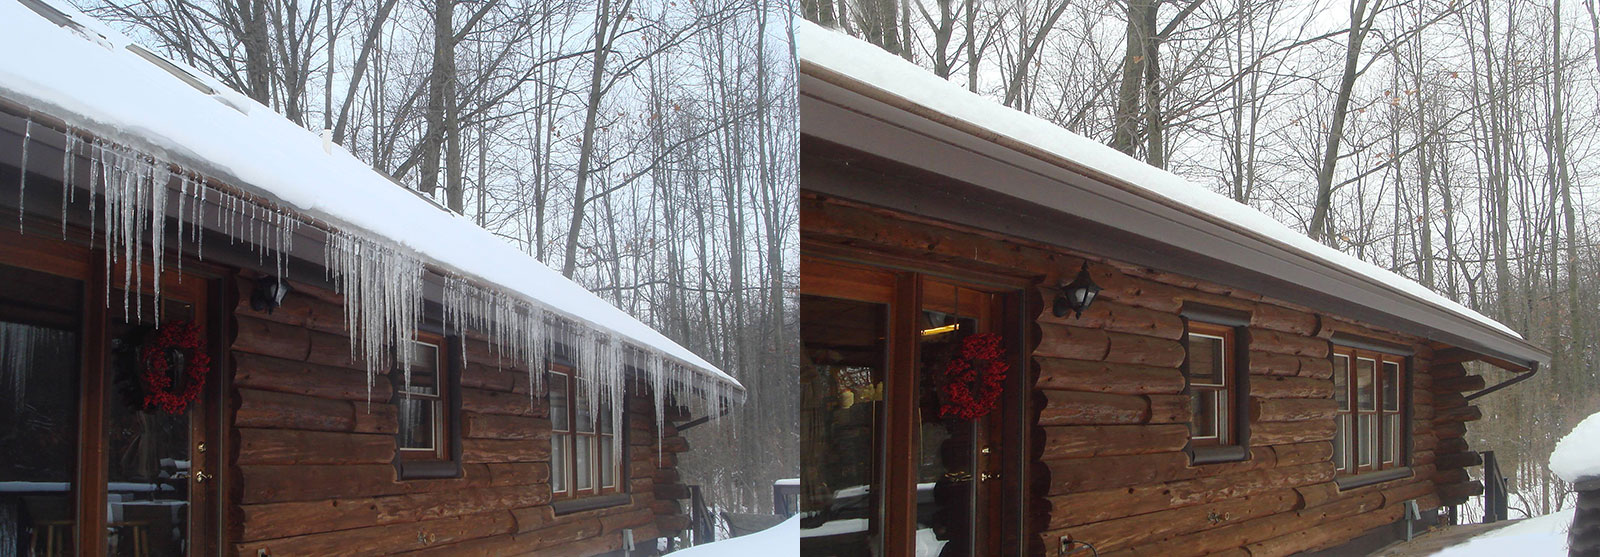 Home exterior in wintertime before and after Helmet Heat gutter accessory installation